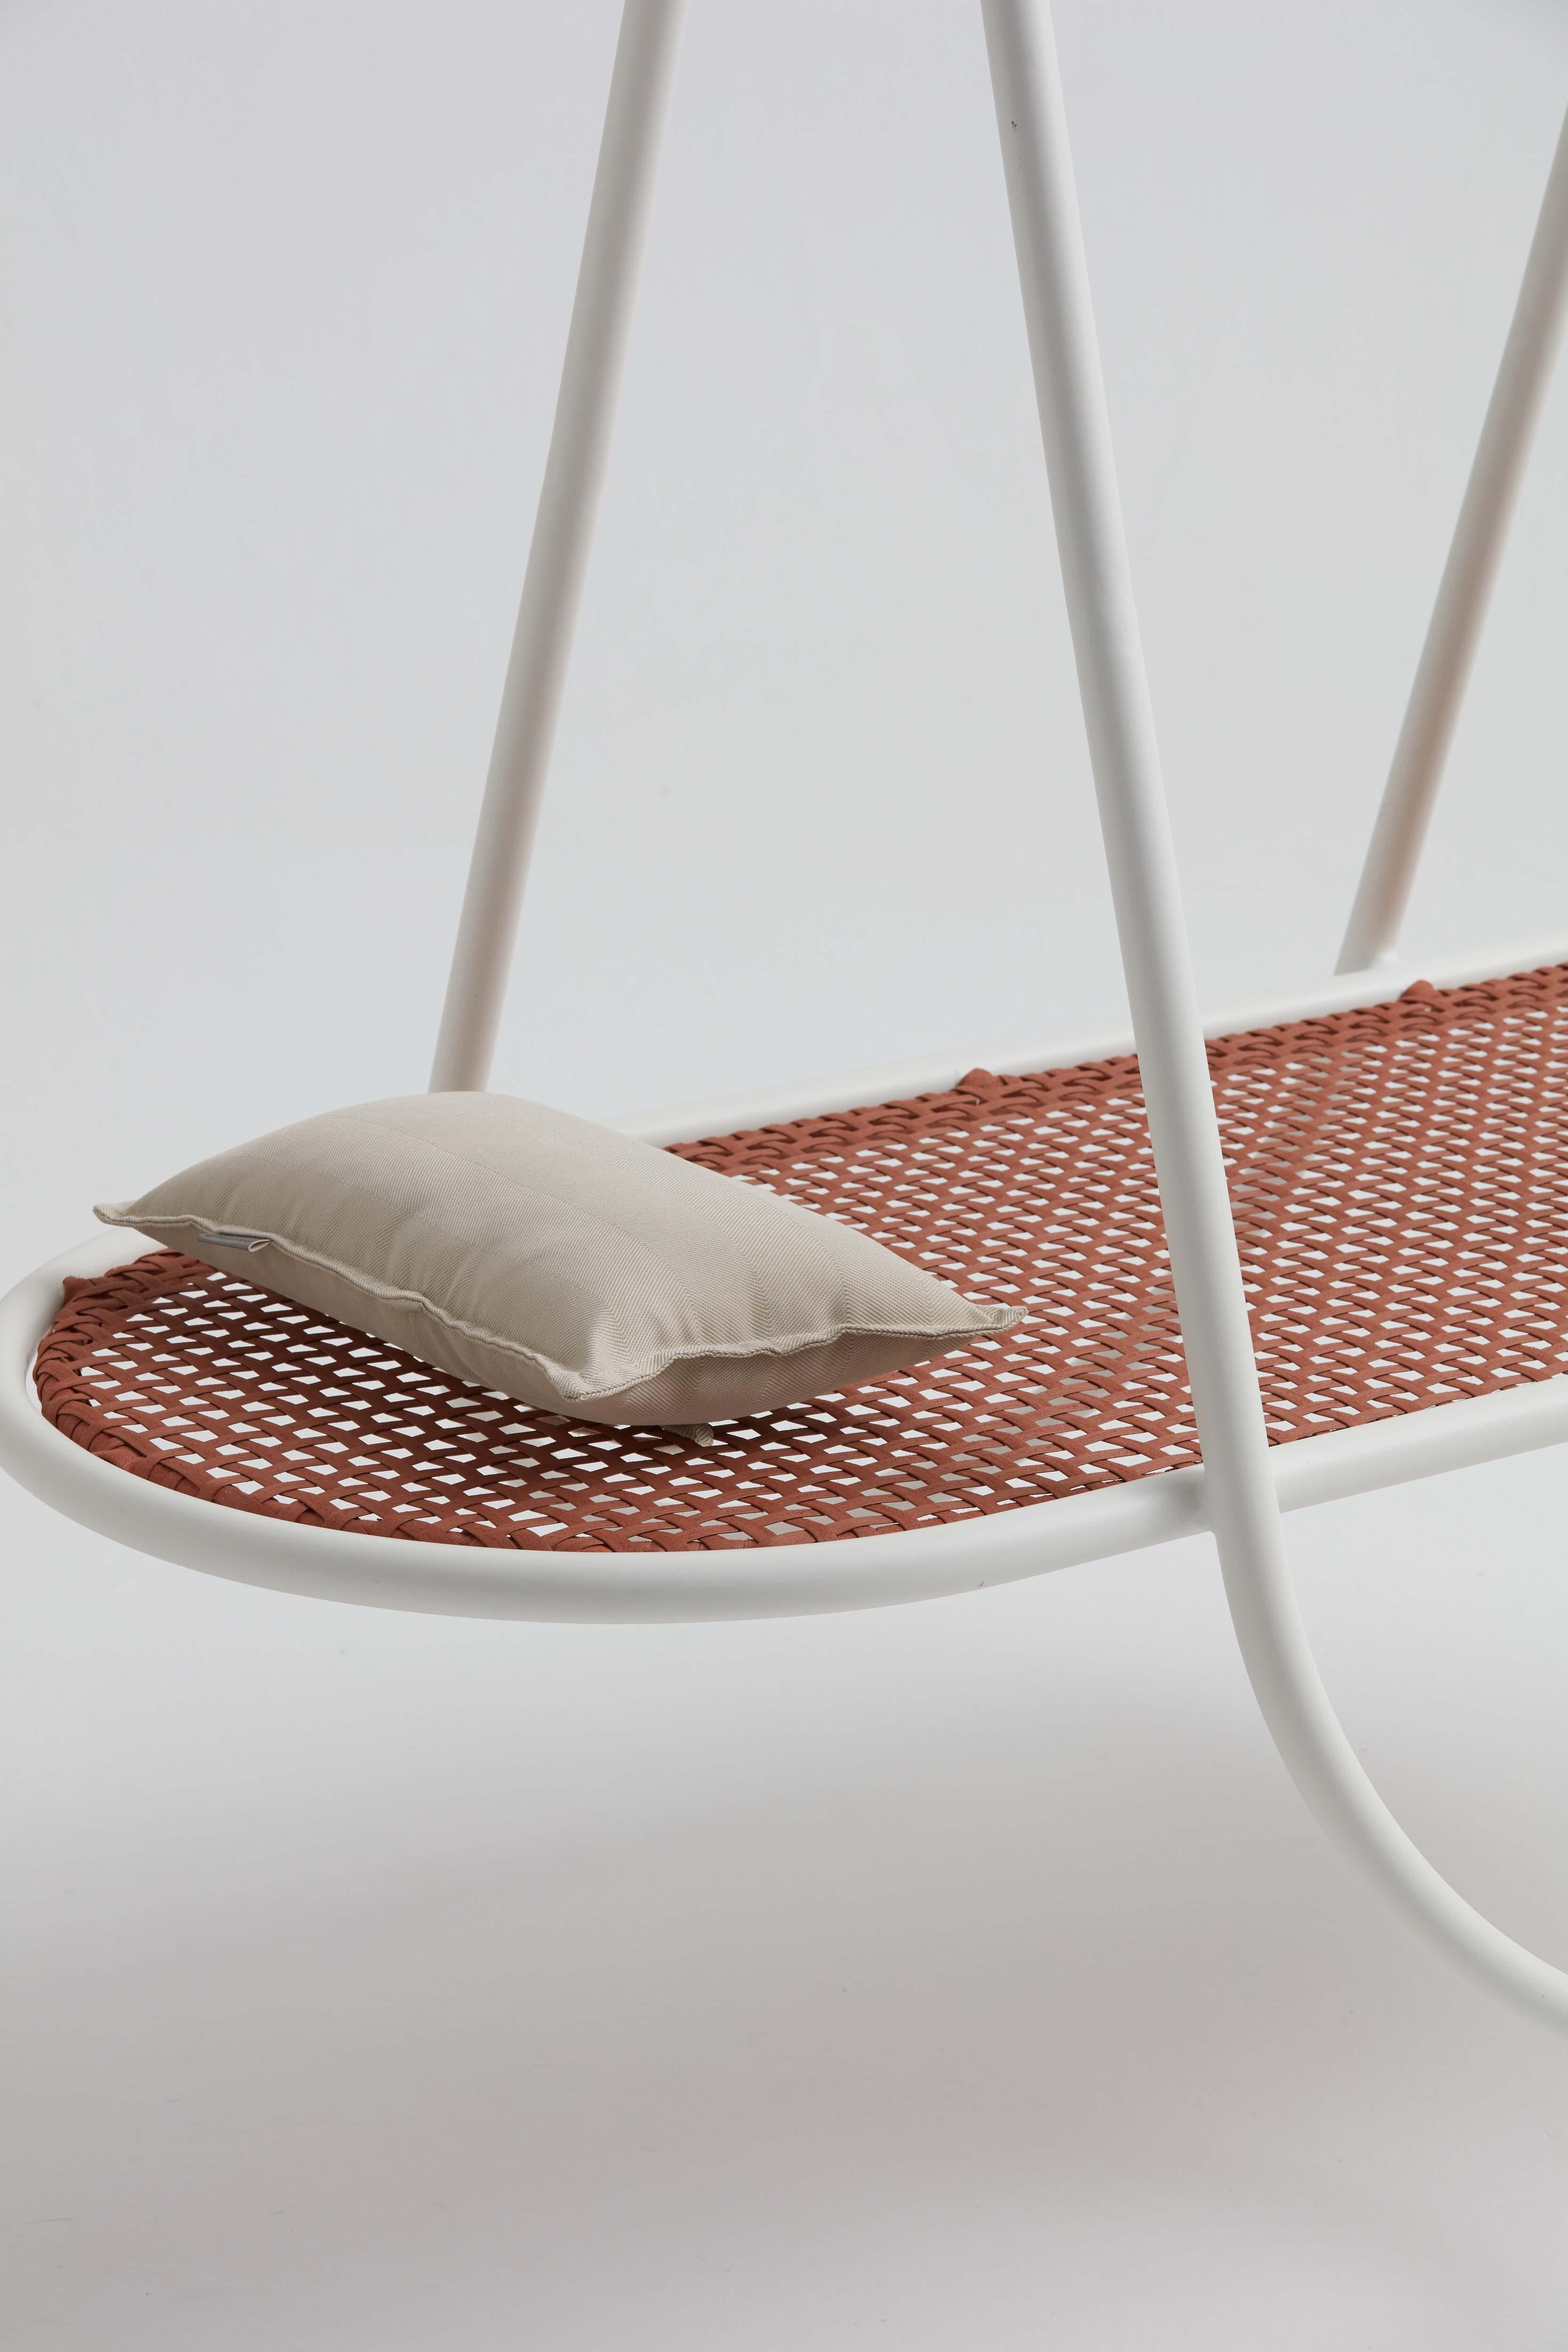 Synthetic OCA, Minimalist Hanging Swing Chair by Tiago Curioni in Aluminium For Sale